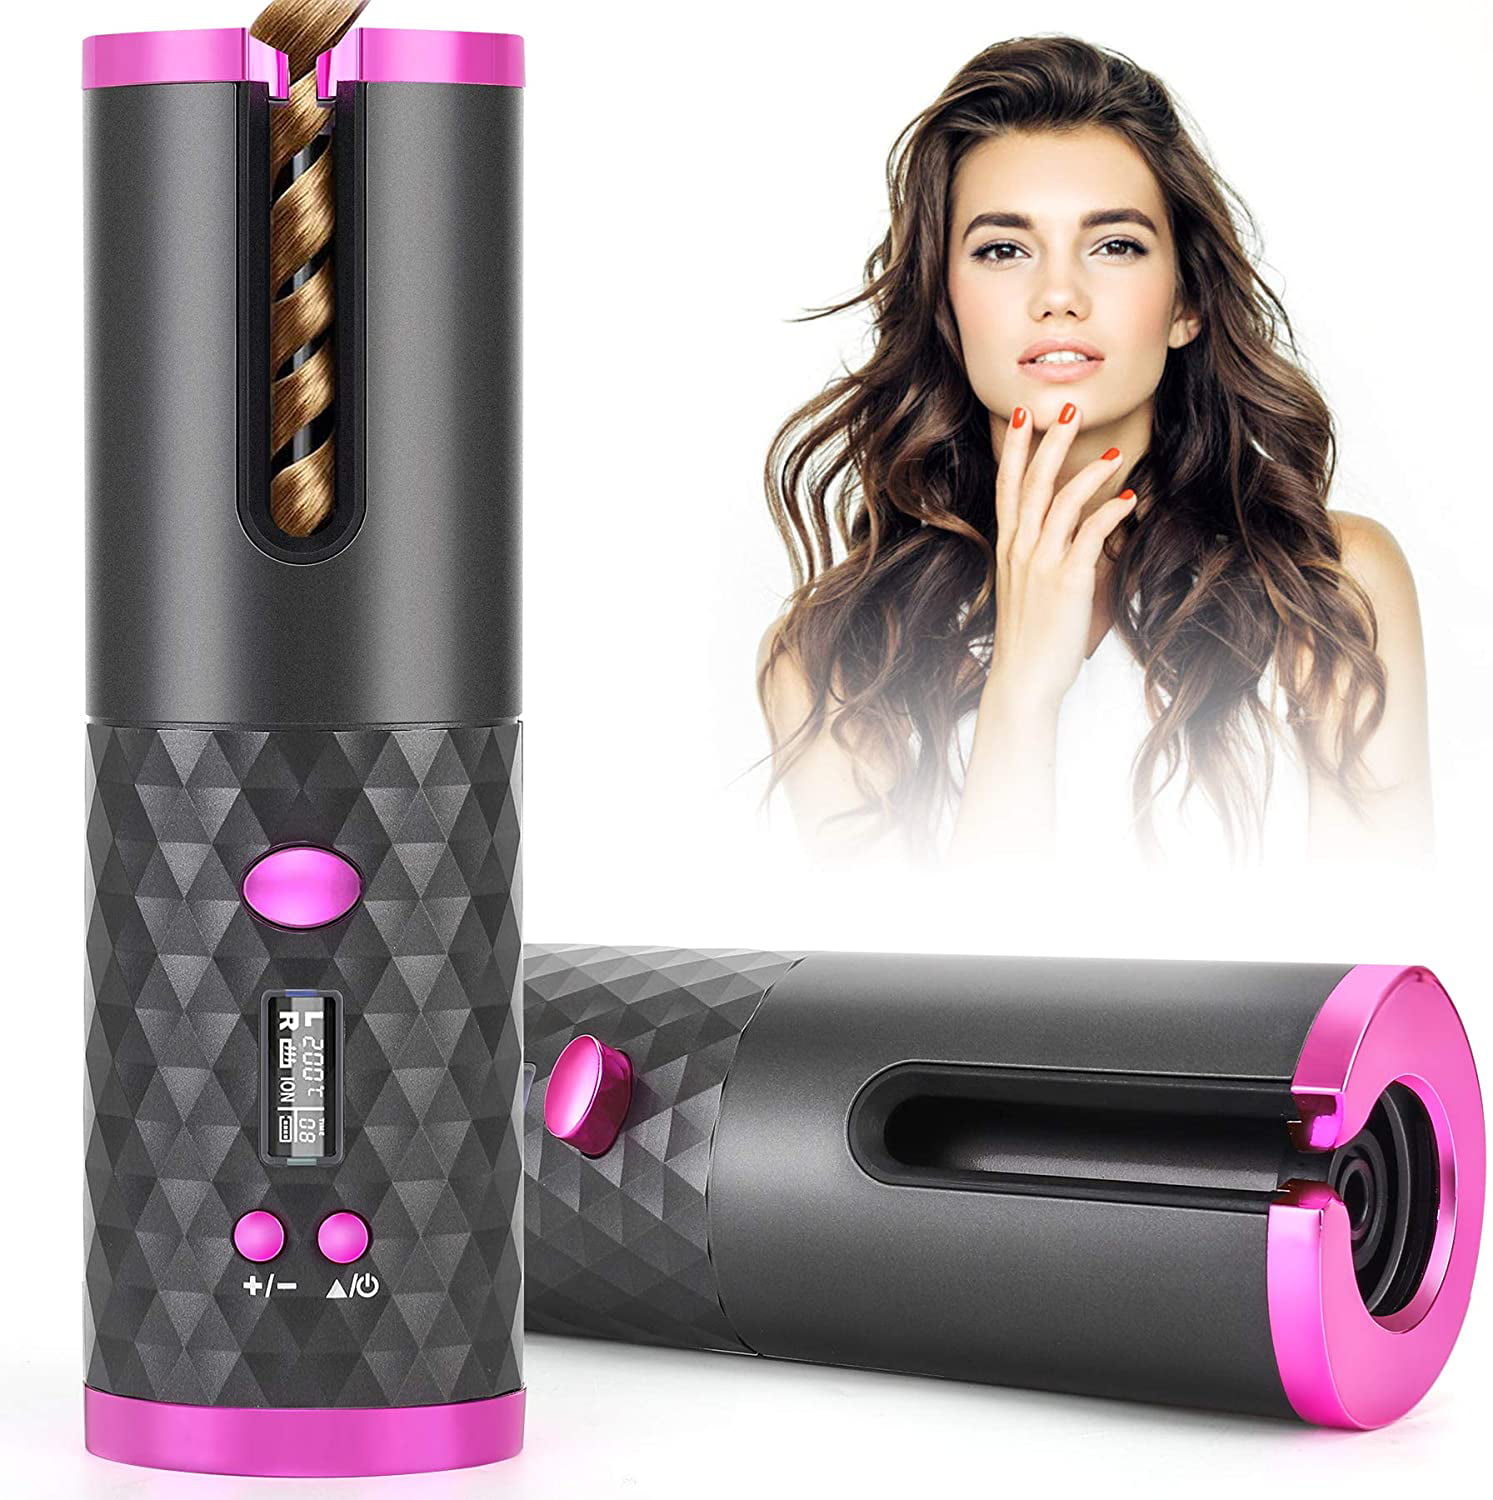 Cordless Automatic Hair Curler, Portable Curling Wand for Hair Styling  Anytime, Anywhere, Rechargeable Auto Hair Curler with 6 Temperature & Timer  Settings - Walmart.com